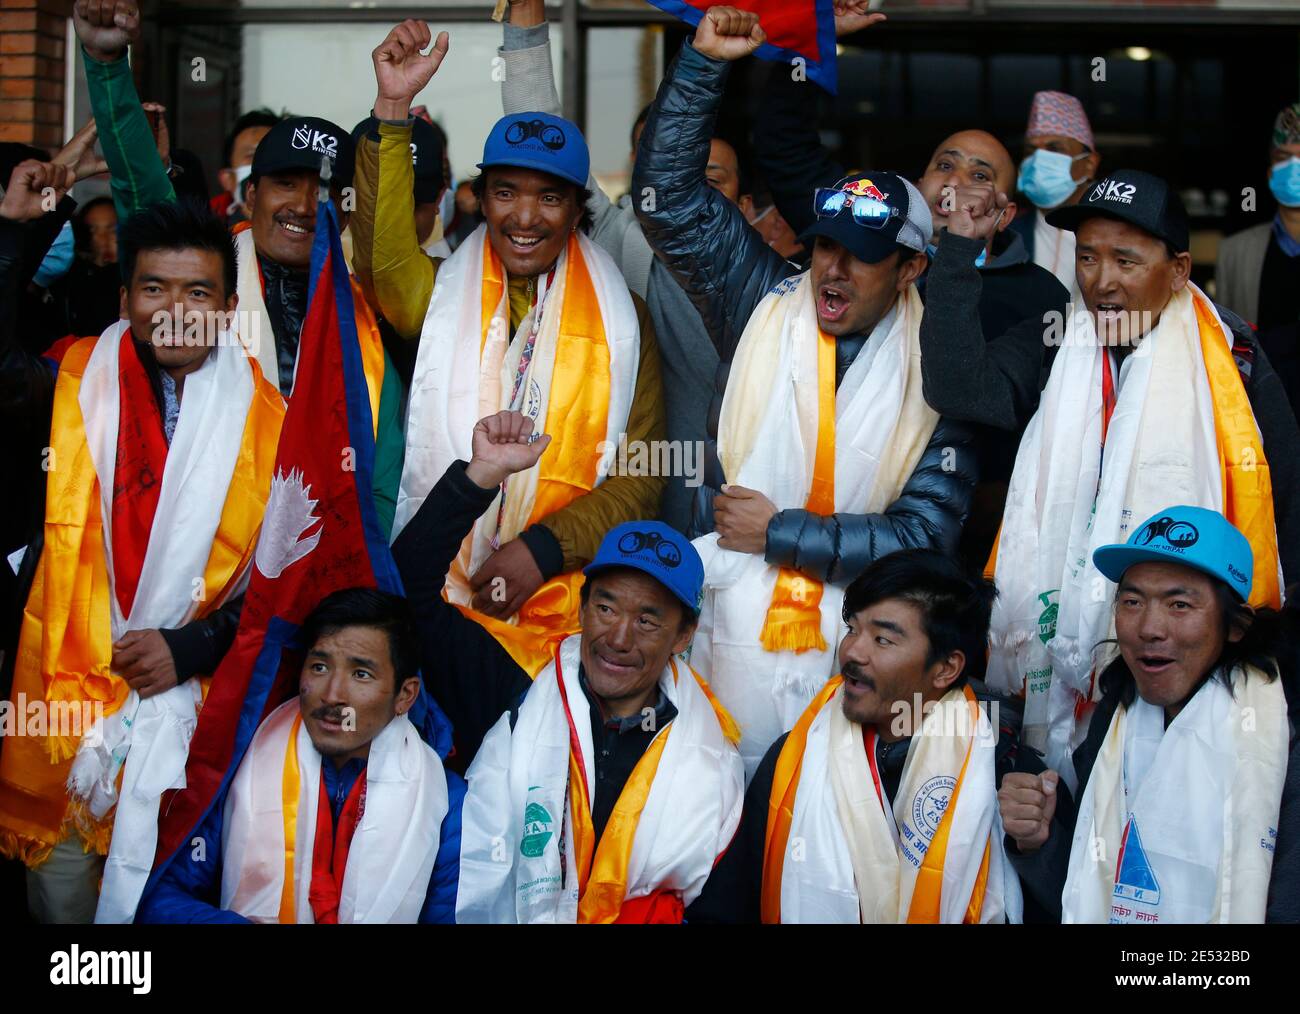 Kathmandu, Nepal. 26th Jan, 2021. Nepalese climber Nirmal Purja, who along with his team recently made history by scaling the K2 summit in the winter season, poses for a photograph upon their arrival to Tribhuvan International Airport in Kathmandu, Nepal on Tuesday, January 26, 2021. Credit: Skanda Gautam/ZUMA Wire/Alamy Live News Stock Photo